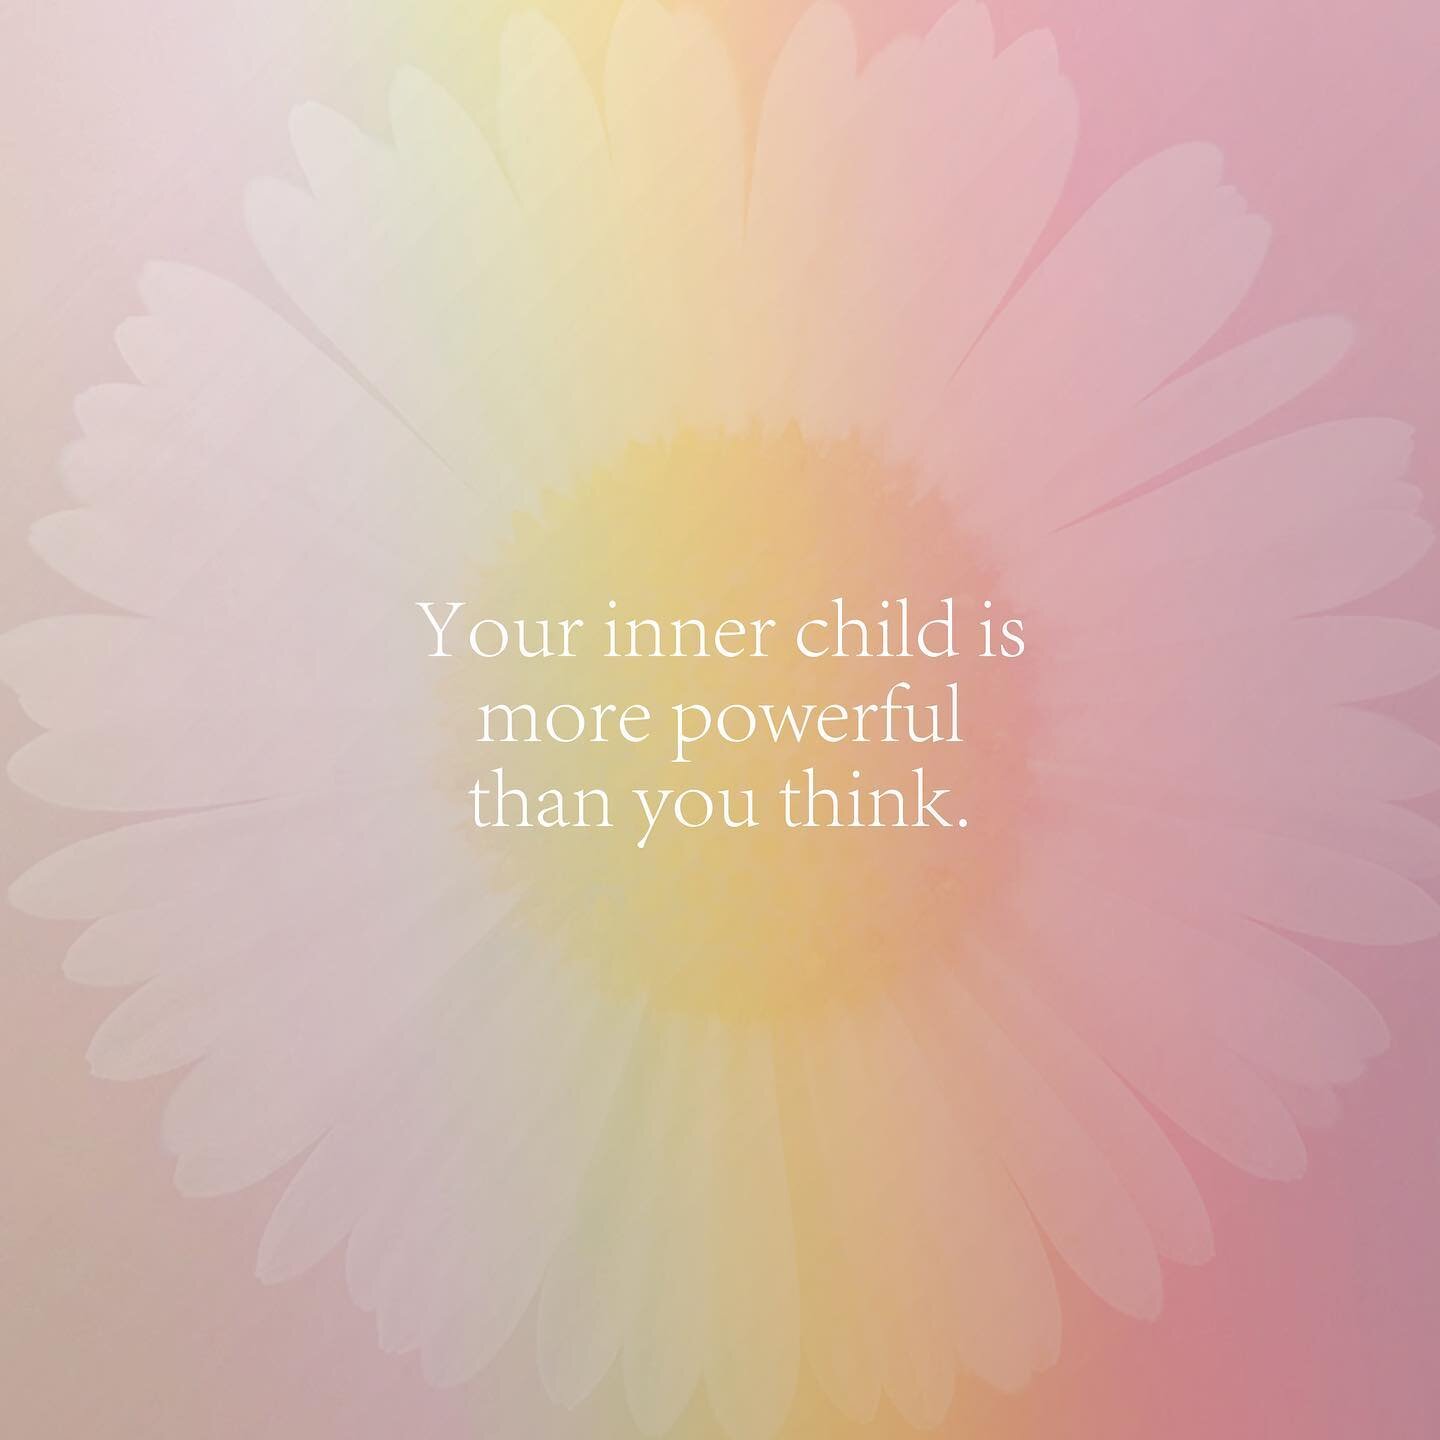 What comes to mind when you think of your inner child?

Oftentimes, we can think of our inner child as a fragile, vulnerable being. This is only part of the truth. 
The inner child is the part within us that can harbour early memories and experiences